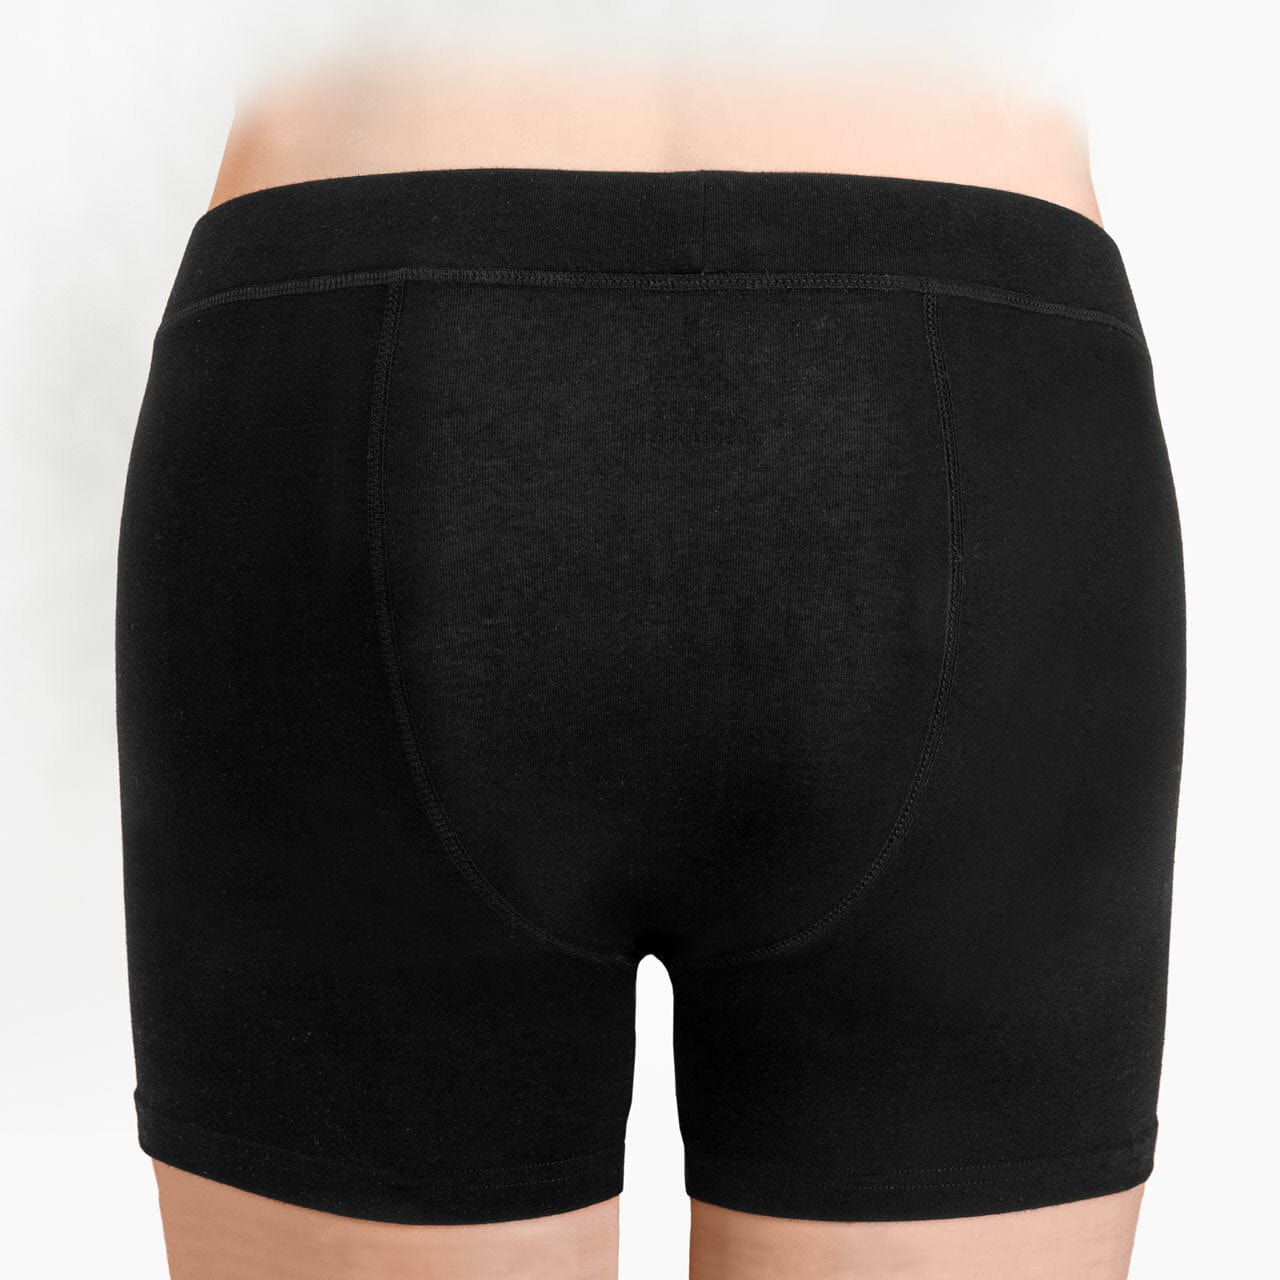 Men's Organic Cotton Briefs with Covered Elastic - Natural Clothing Company